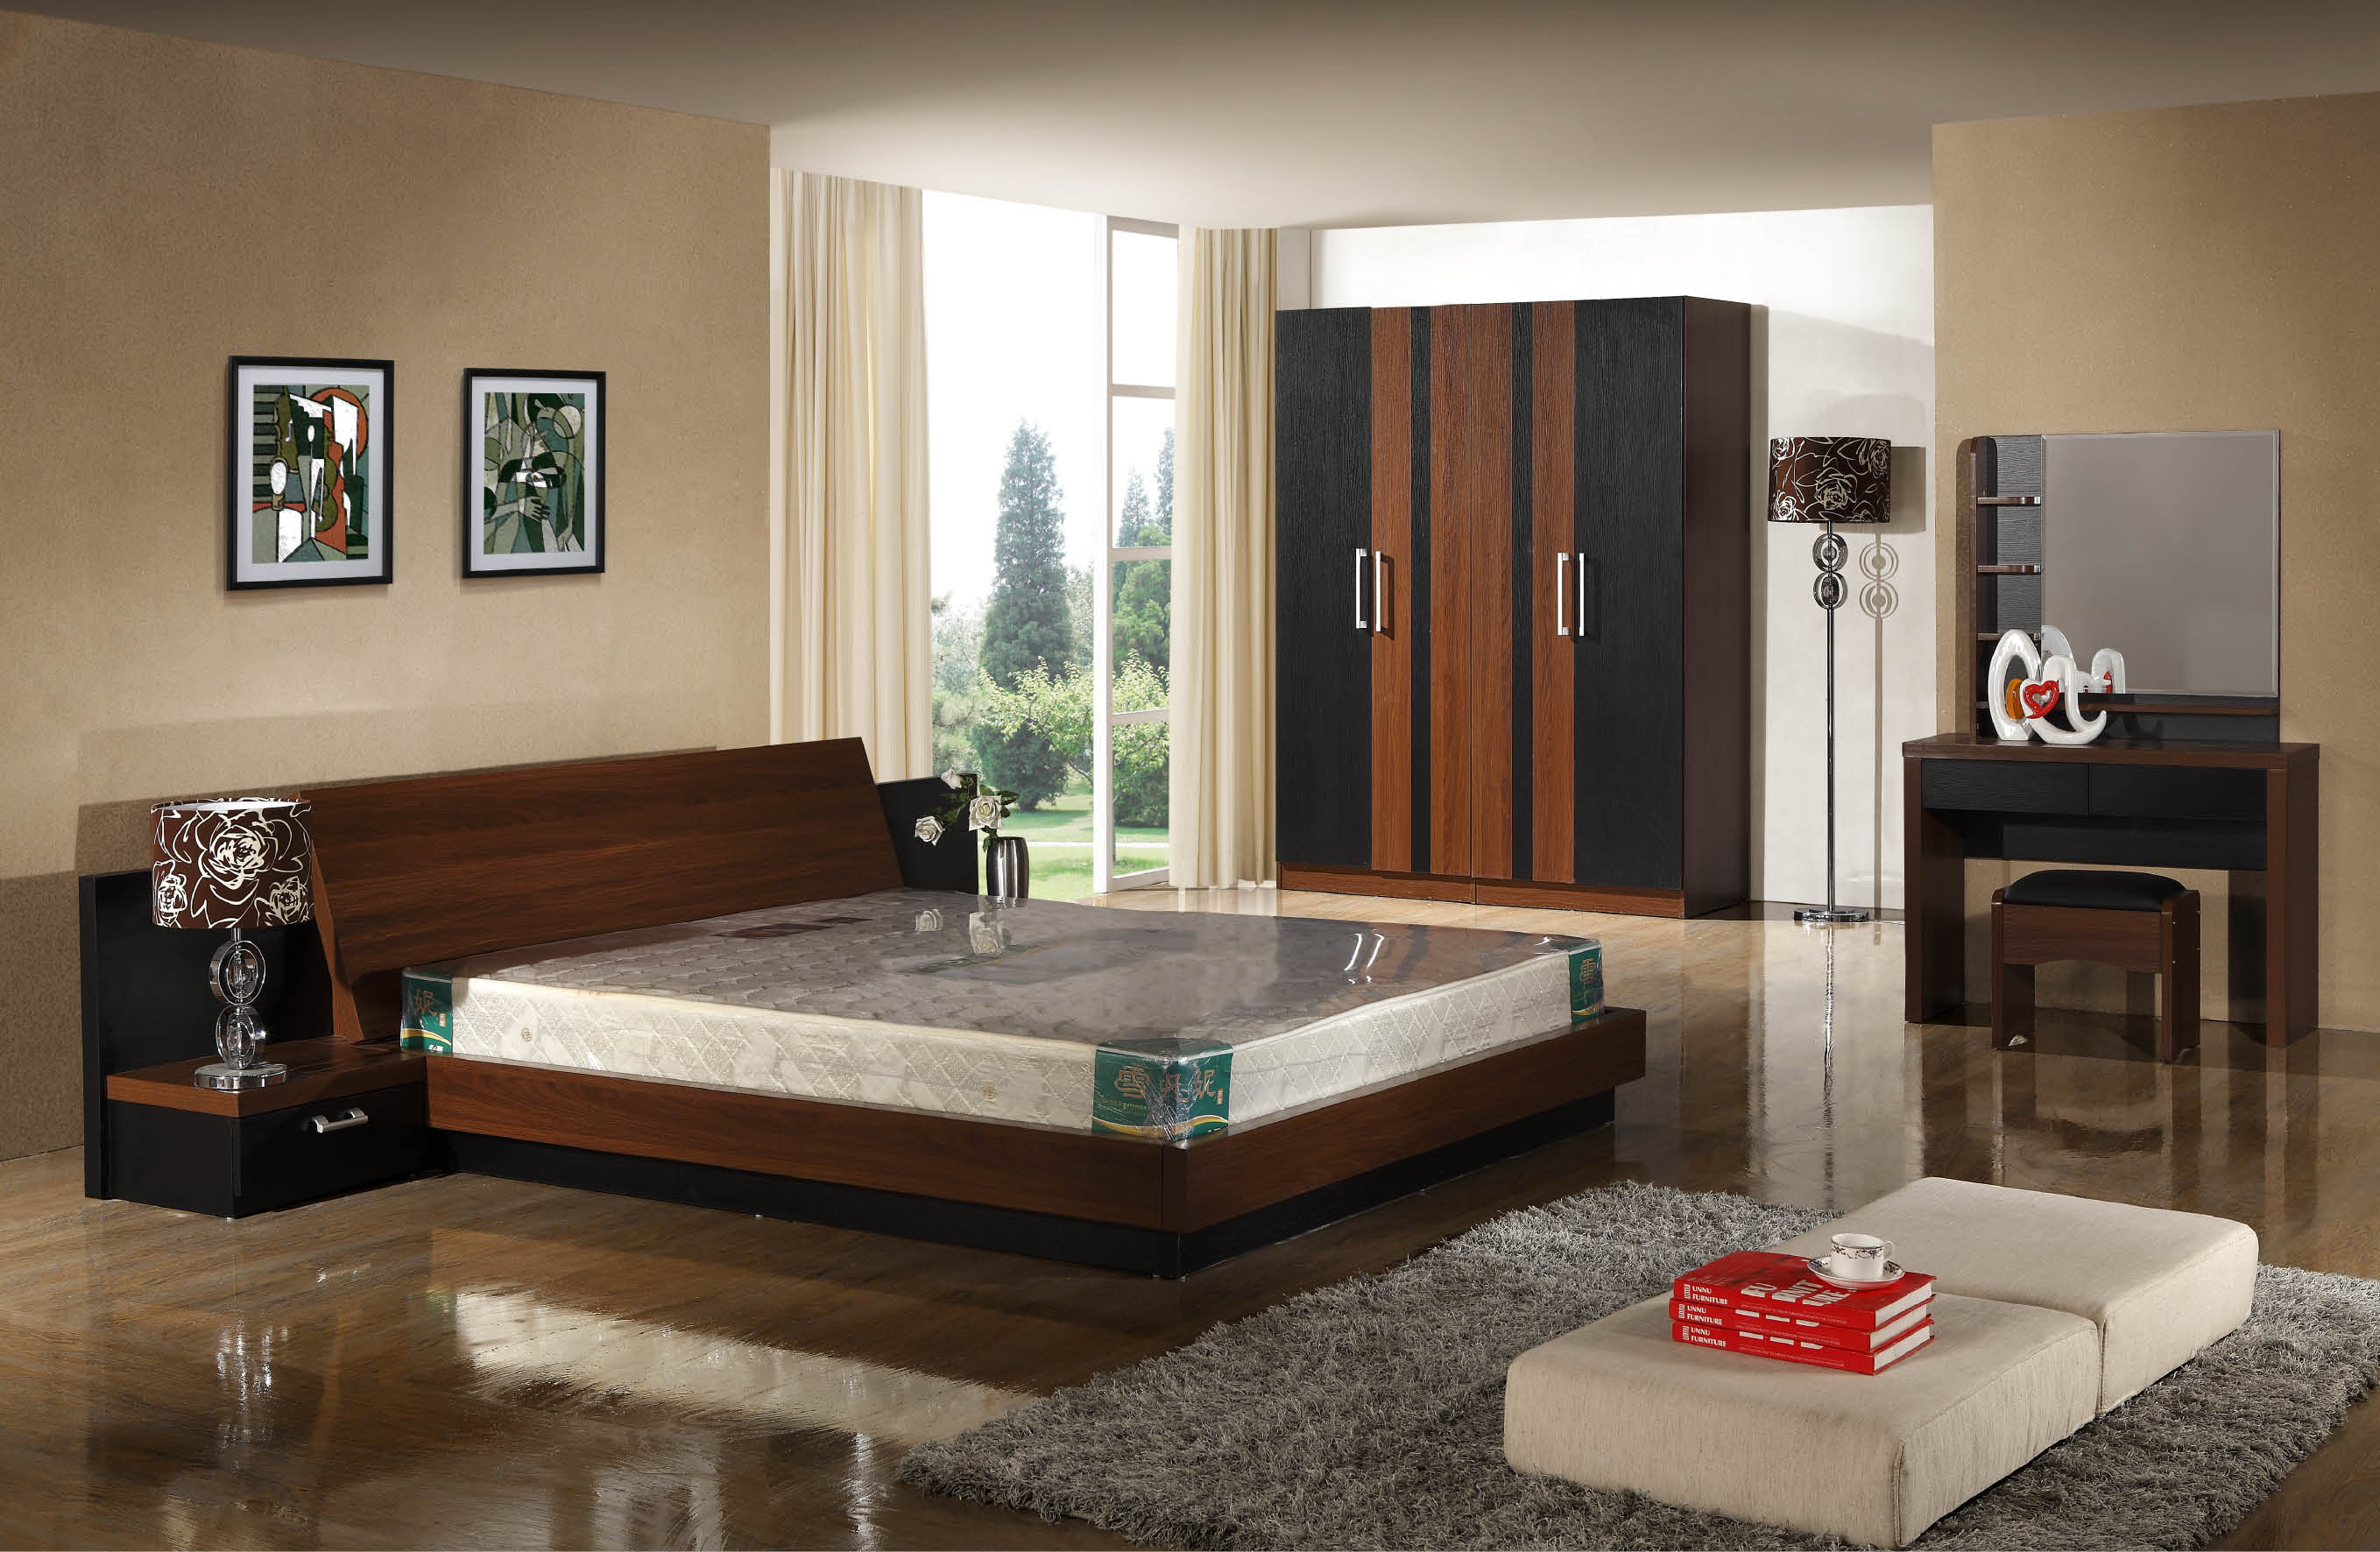 Foshan Factory Wholesale Price Latest Design 5 Star Modern Commercial Hotel Bedroom Furniture Set Double King Queen Size Villa Leather Bed UL_L8807